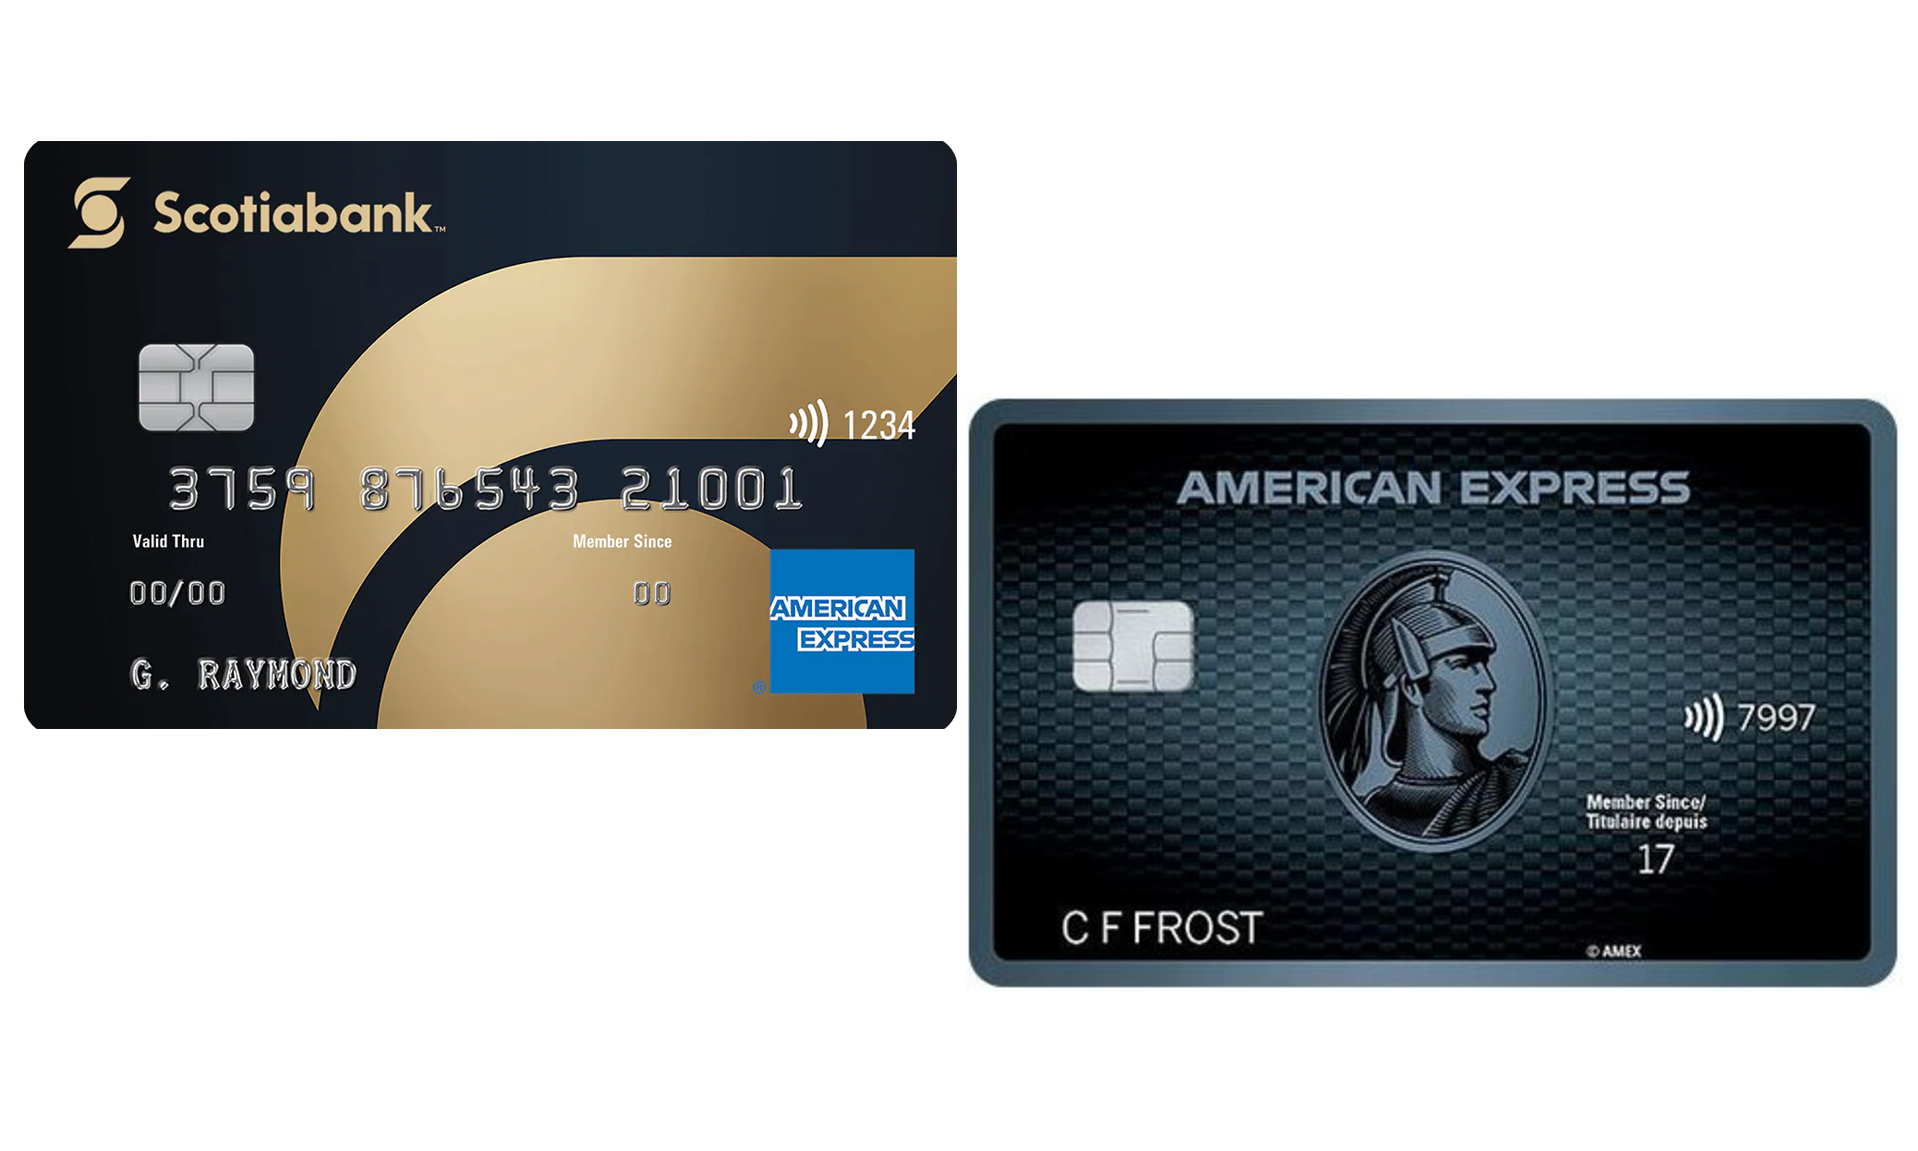 Decide now which card fits better in your wallet! Source: Scotiabank/American Express.